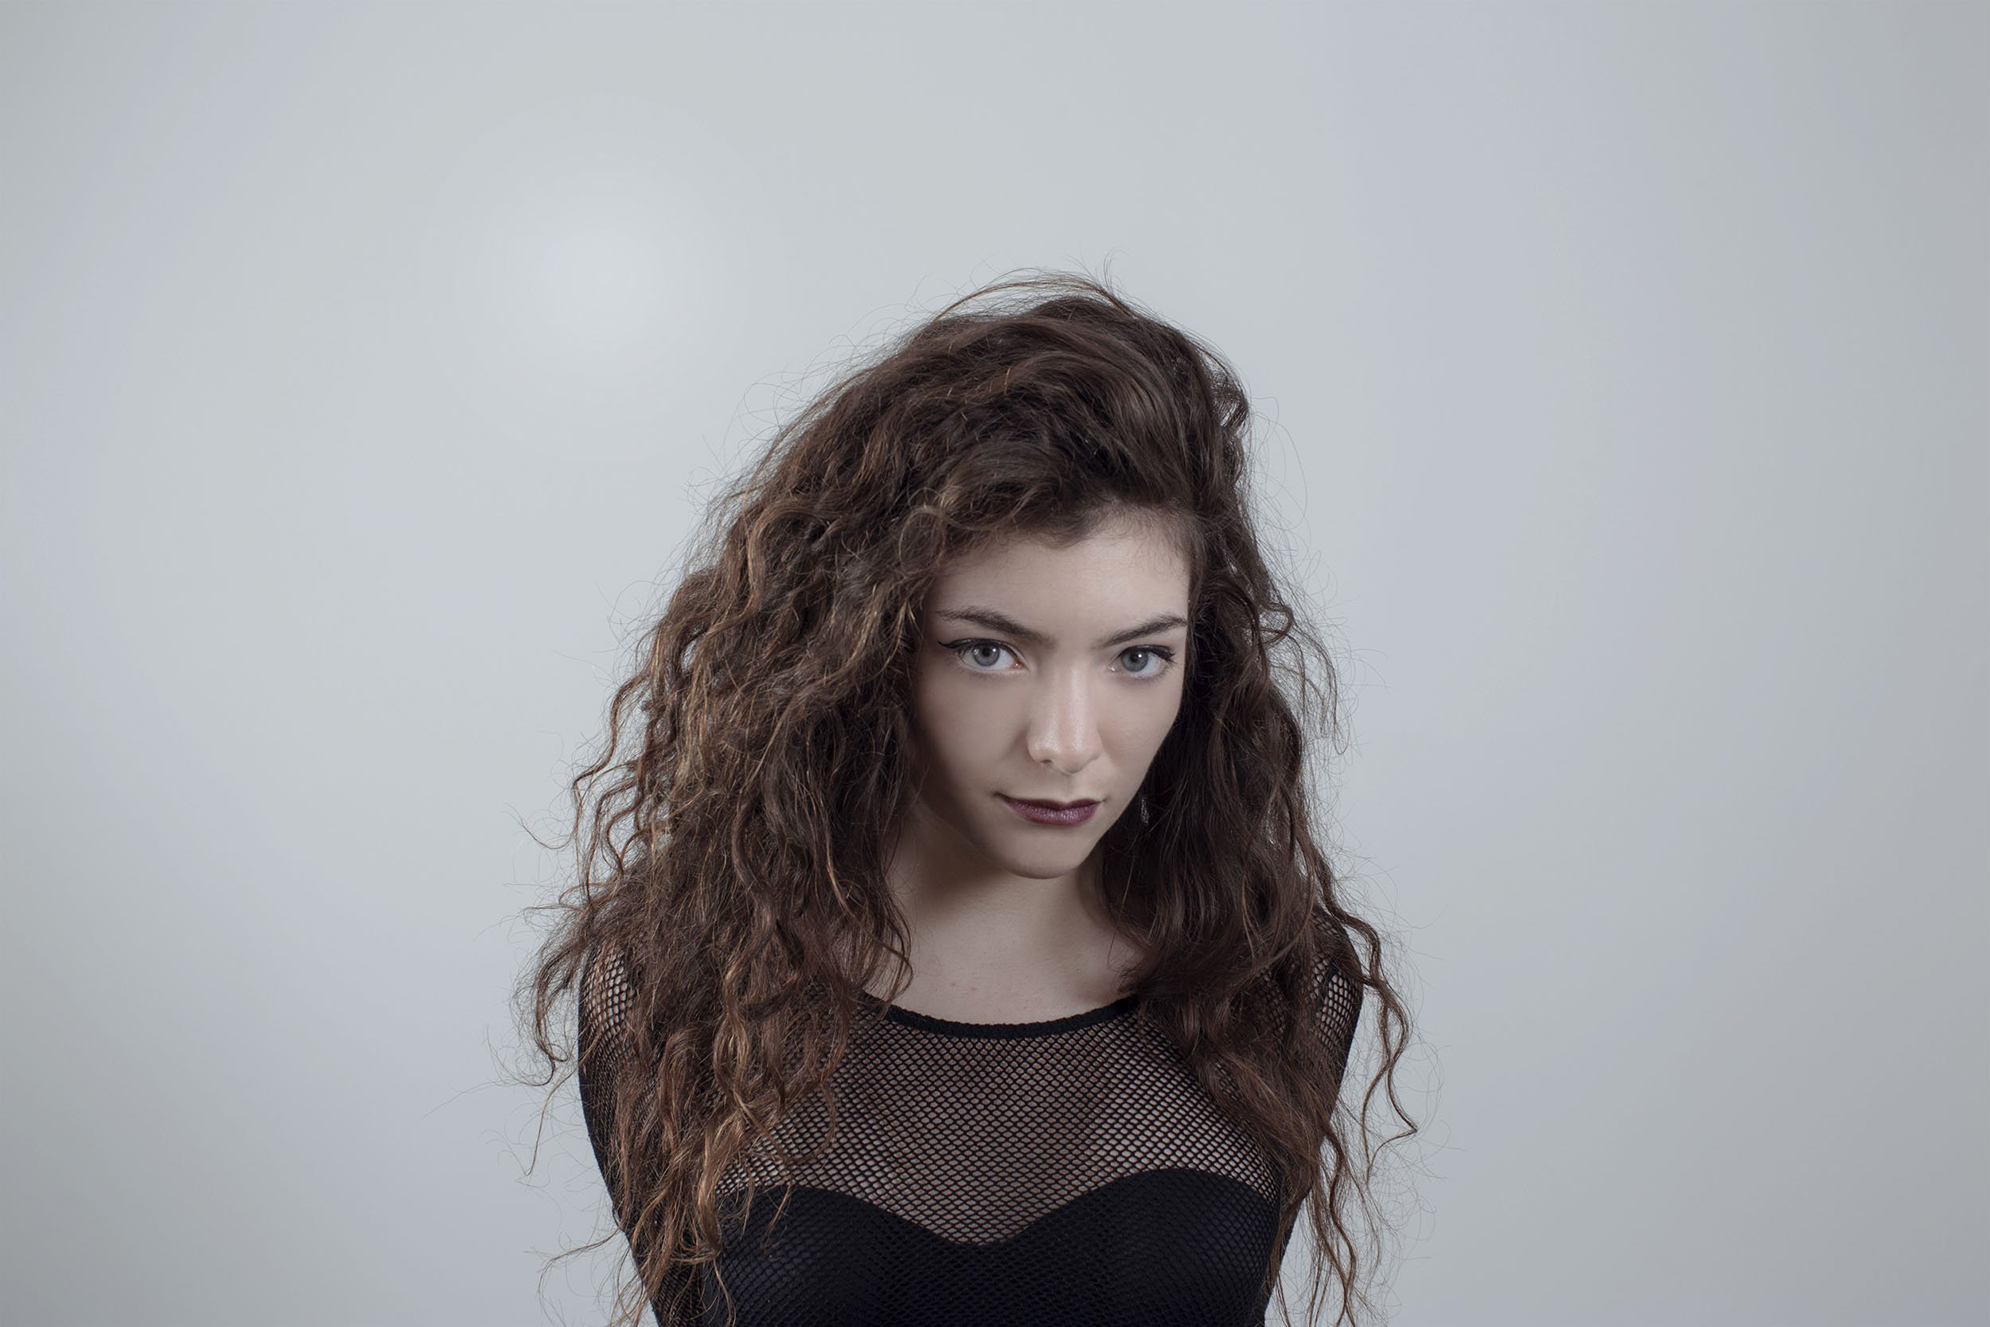 Lorde Backgrounds, Compatible - PC, Mobile, Gadgets| 1990x1327 px